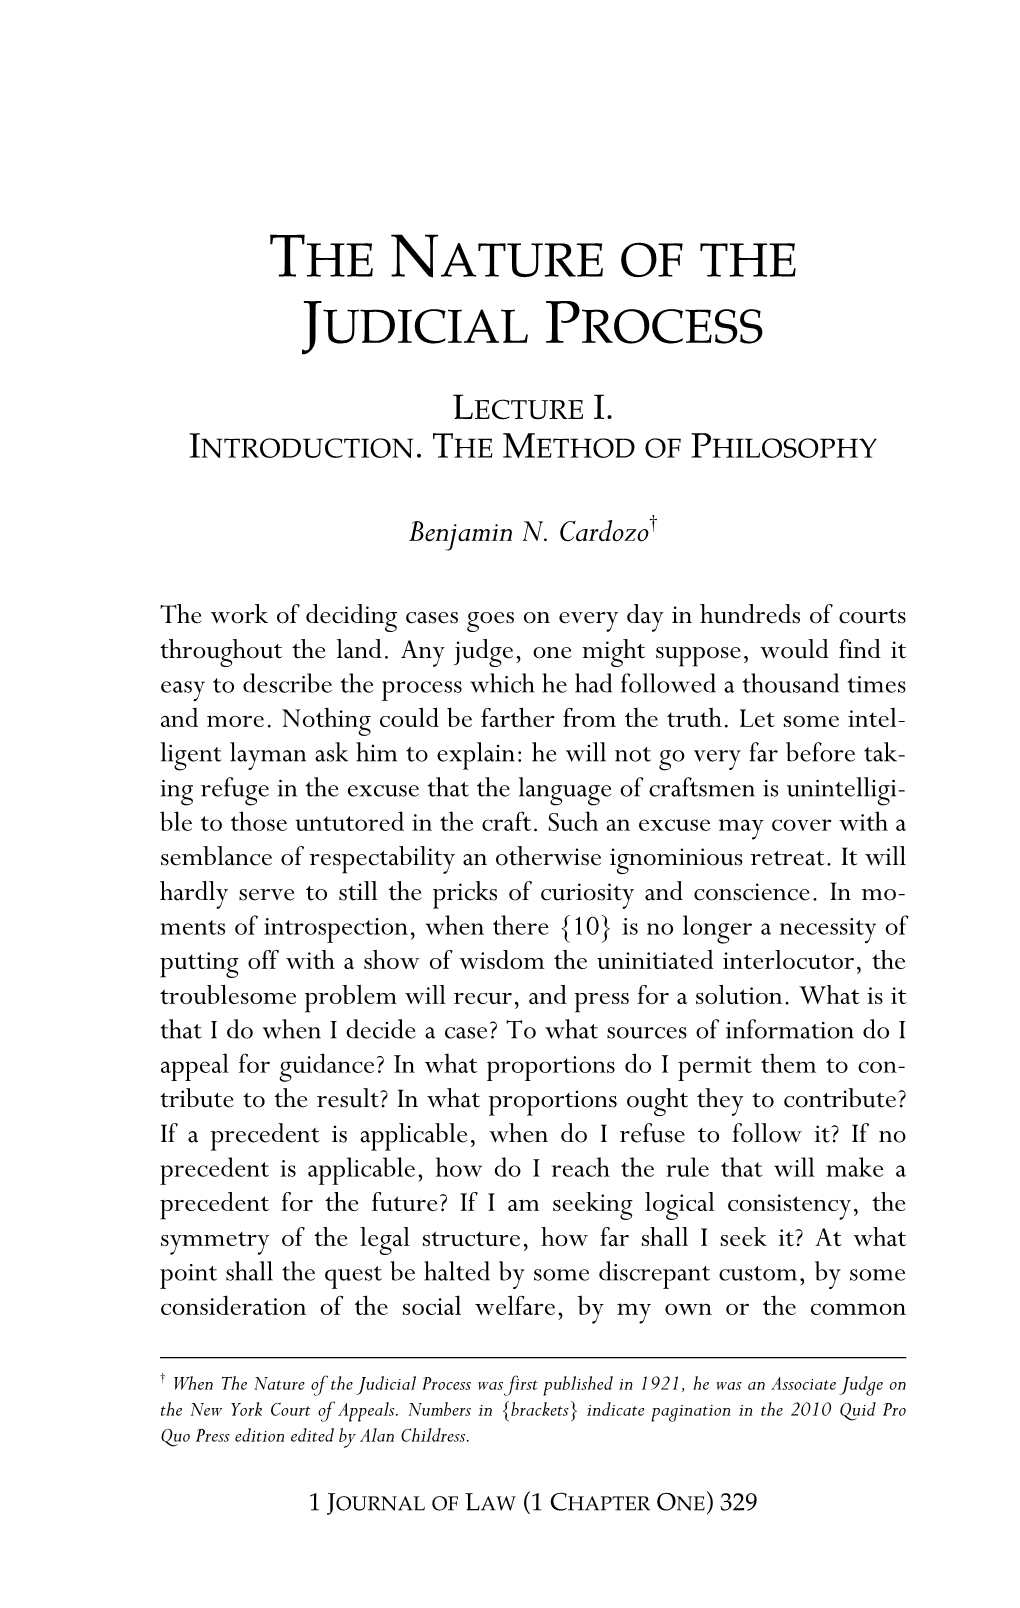 The Nature of the Judicial Process, Lecture I